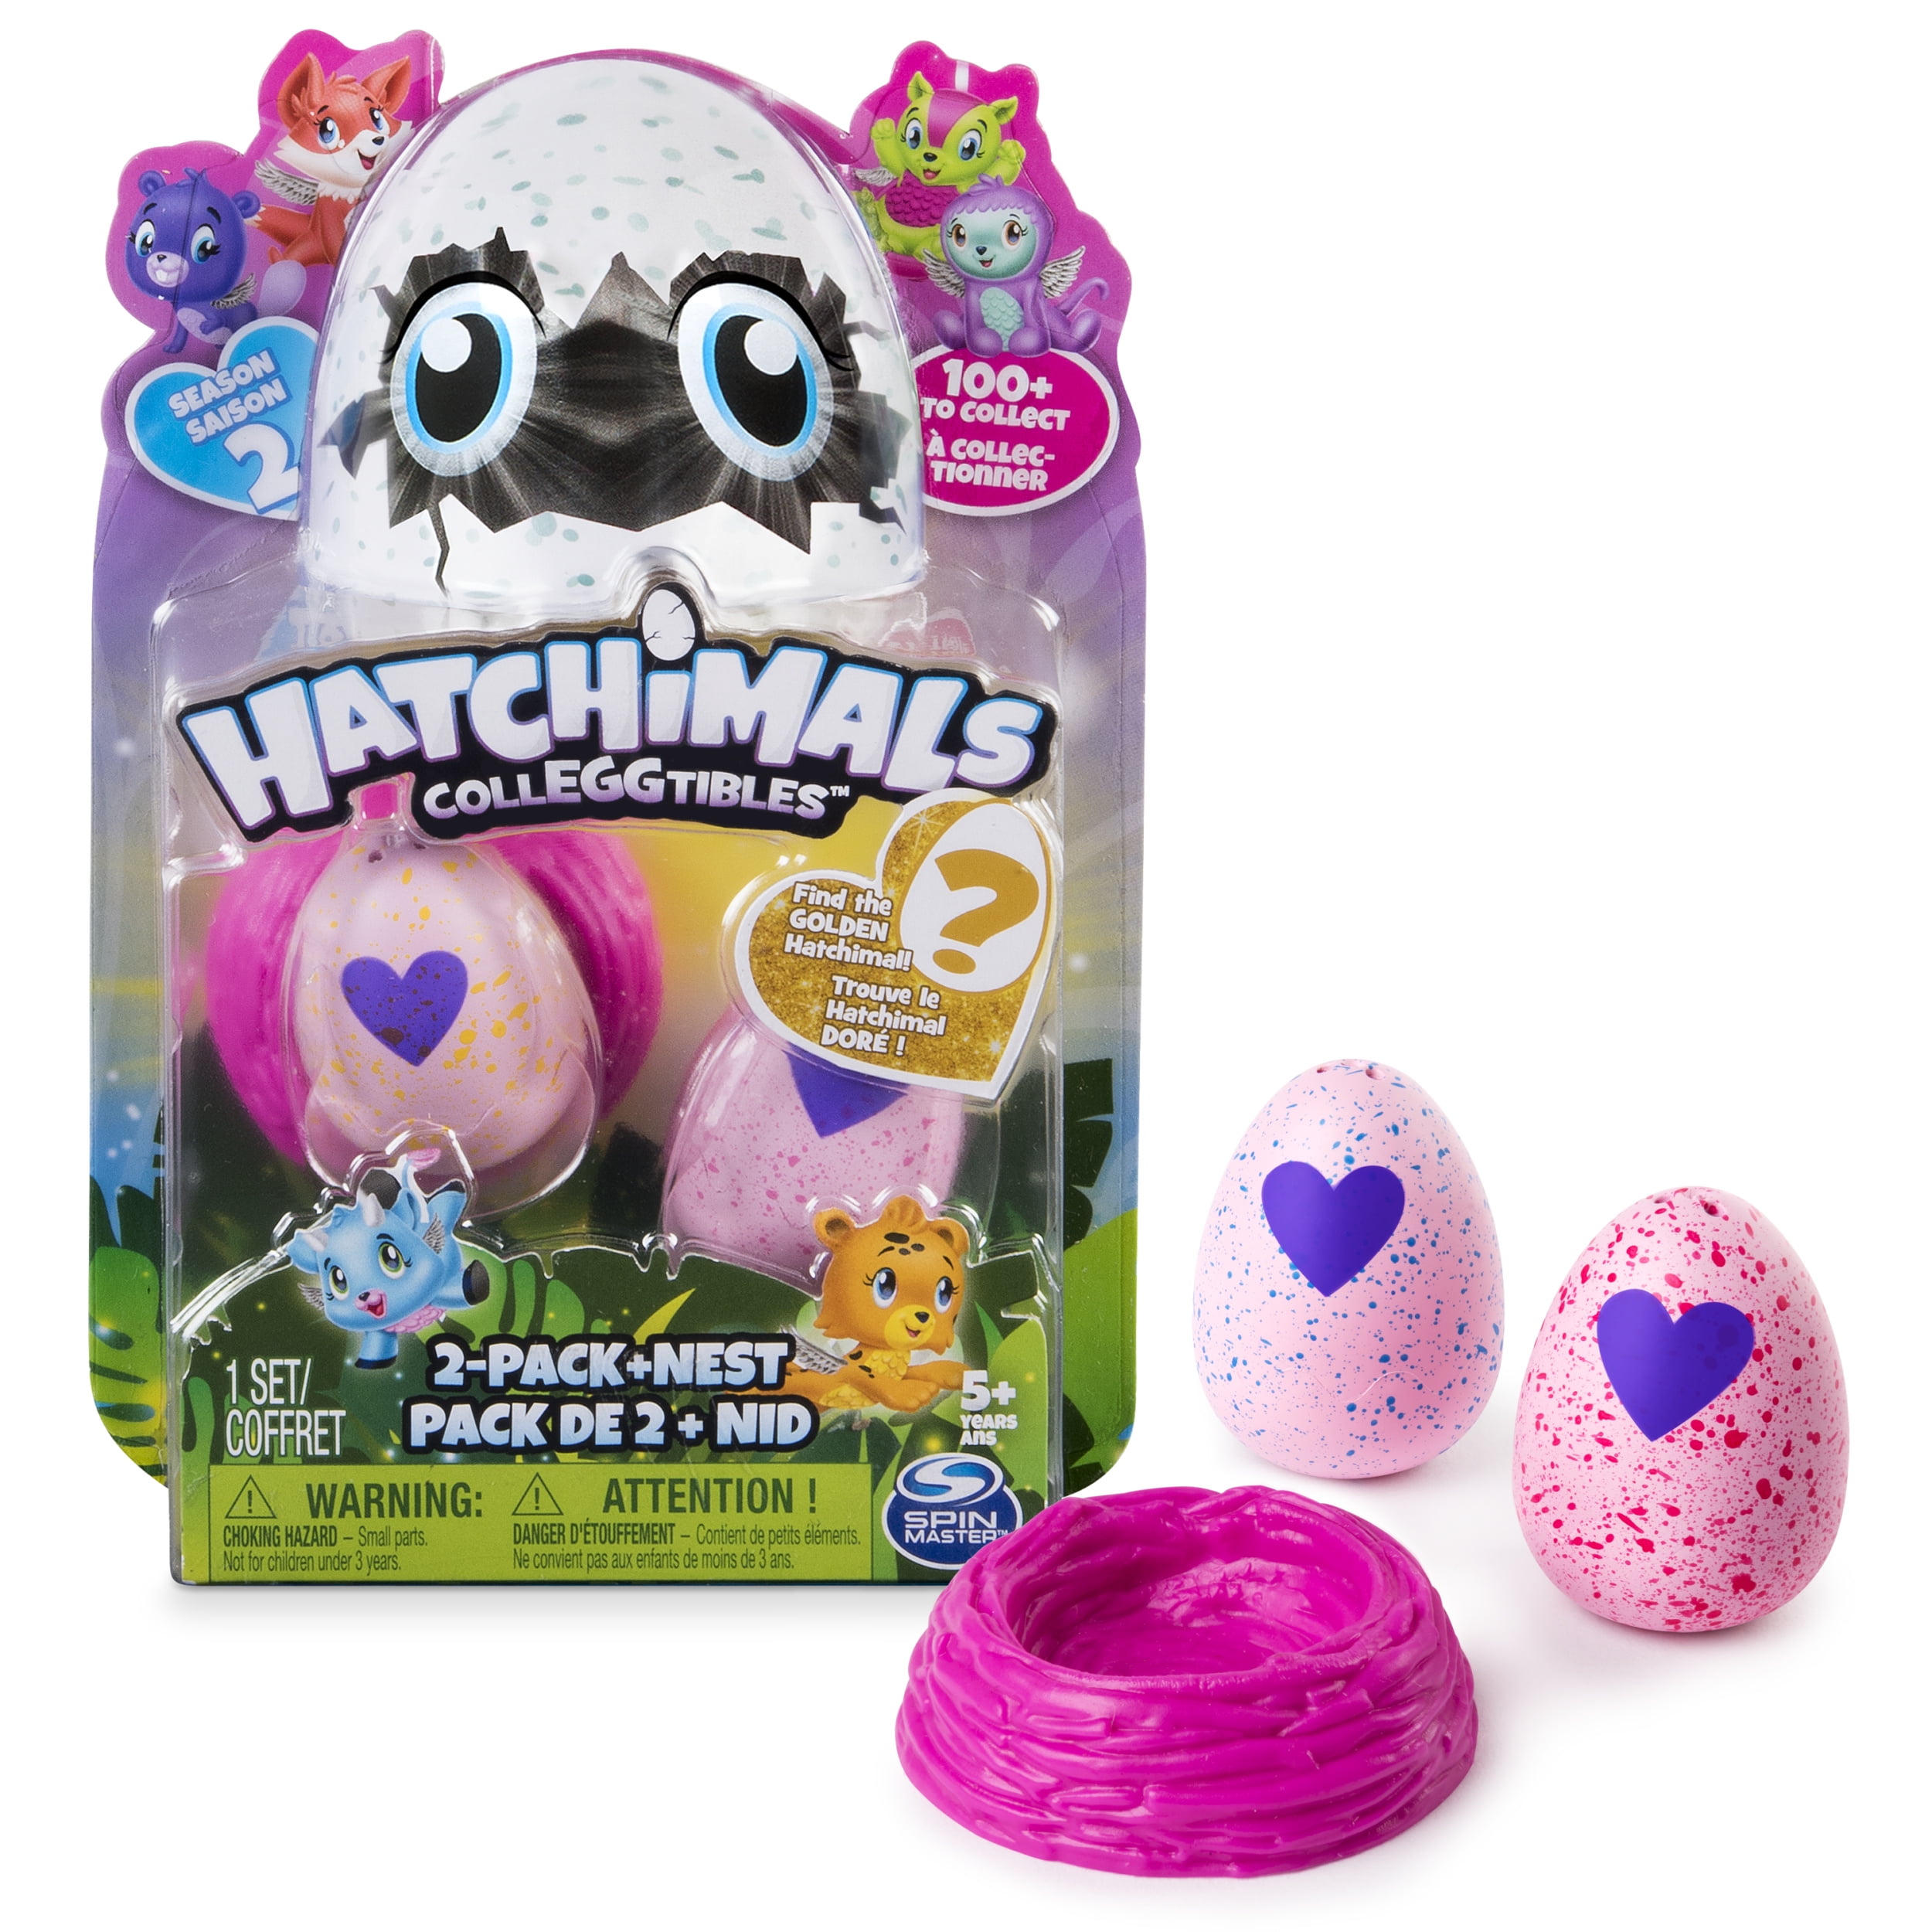 CRYSTAL NEST OWLICORN SEASON 2 TOYS R US NEW 1 Hatchimals Colleggtibles 2 PACK 